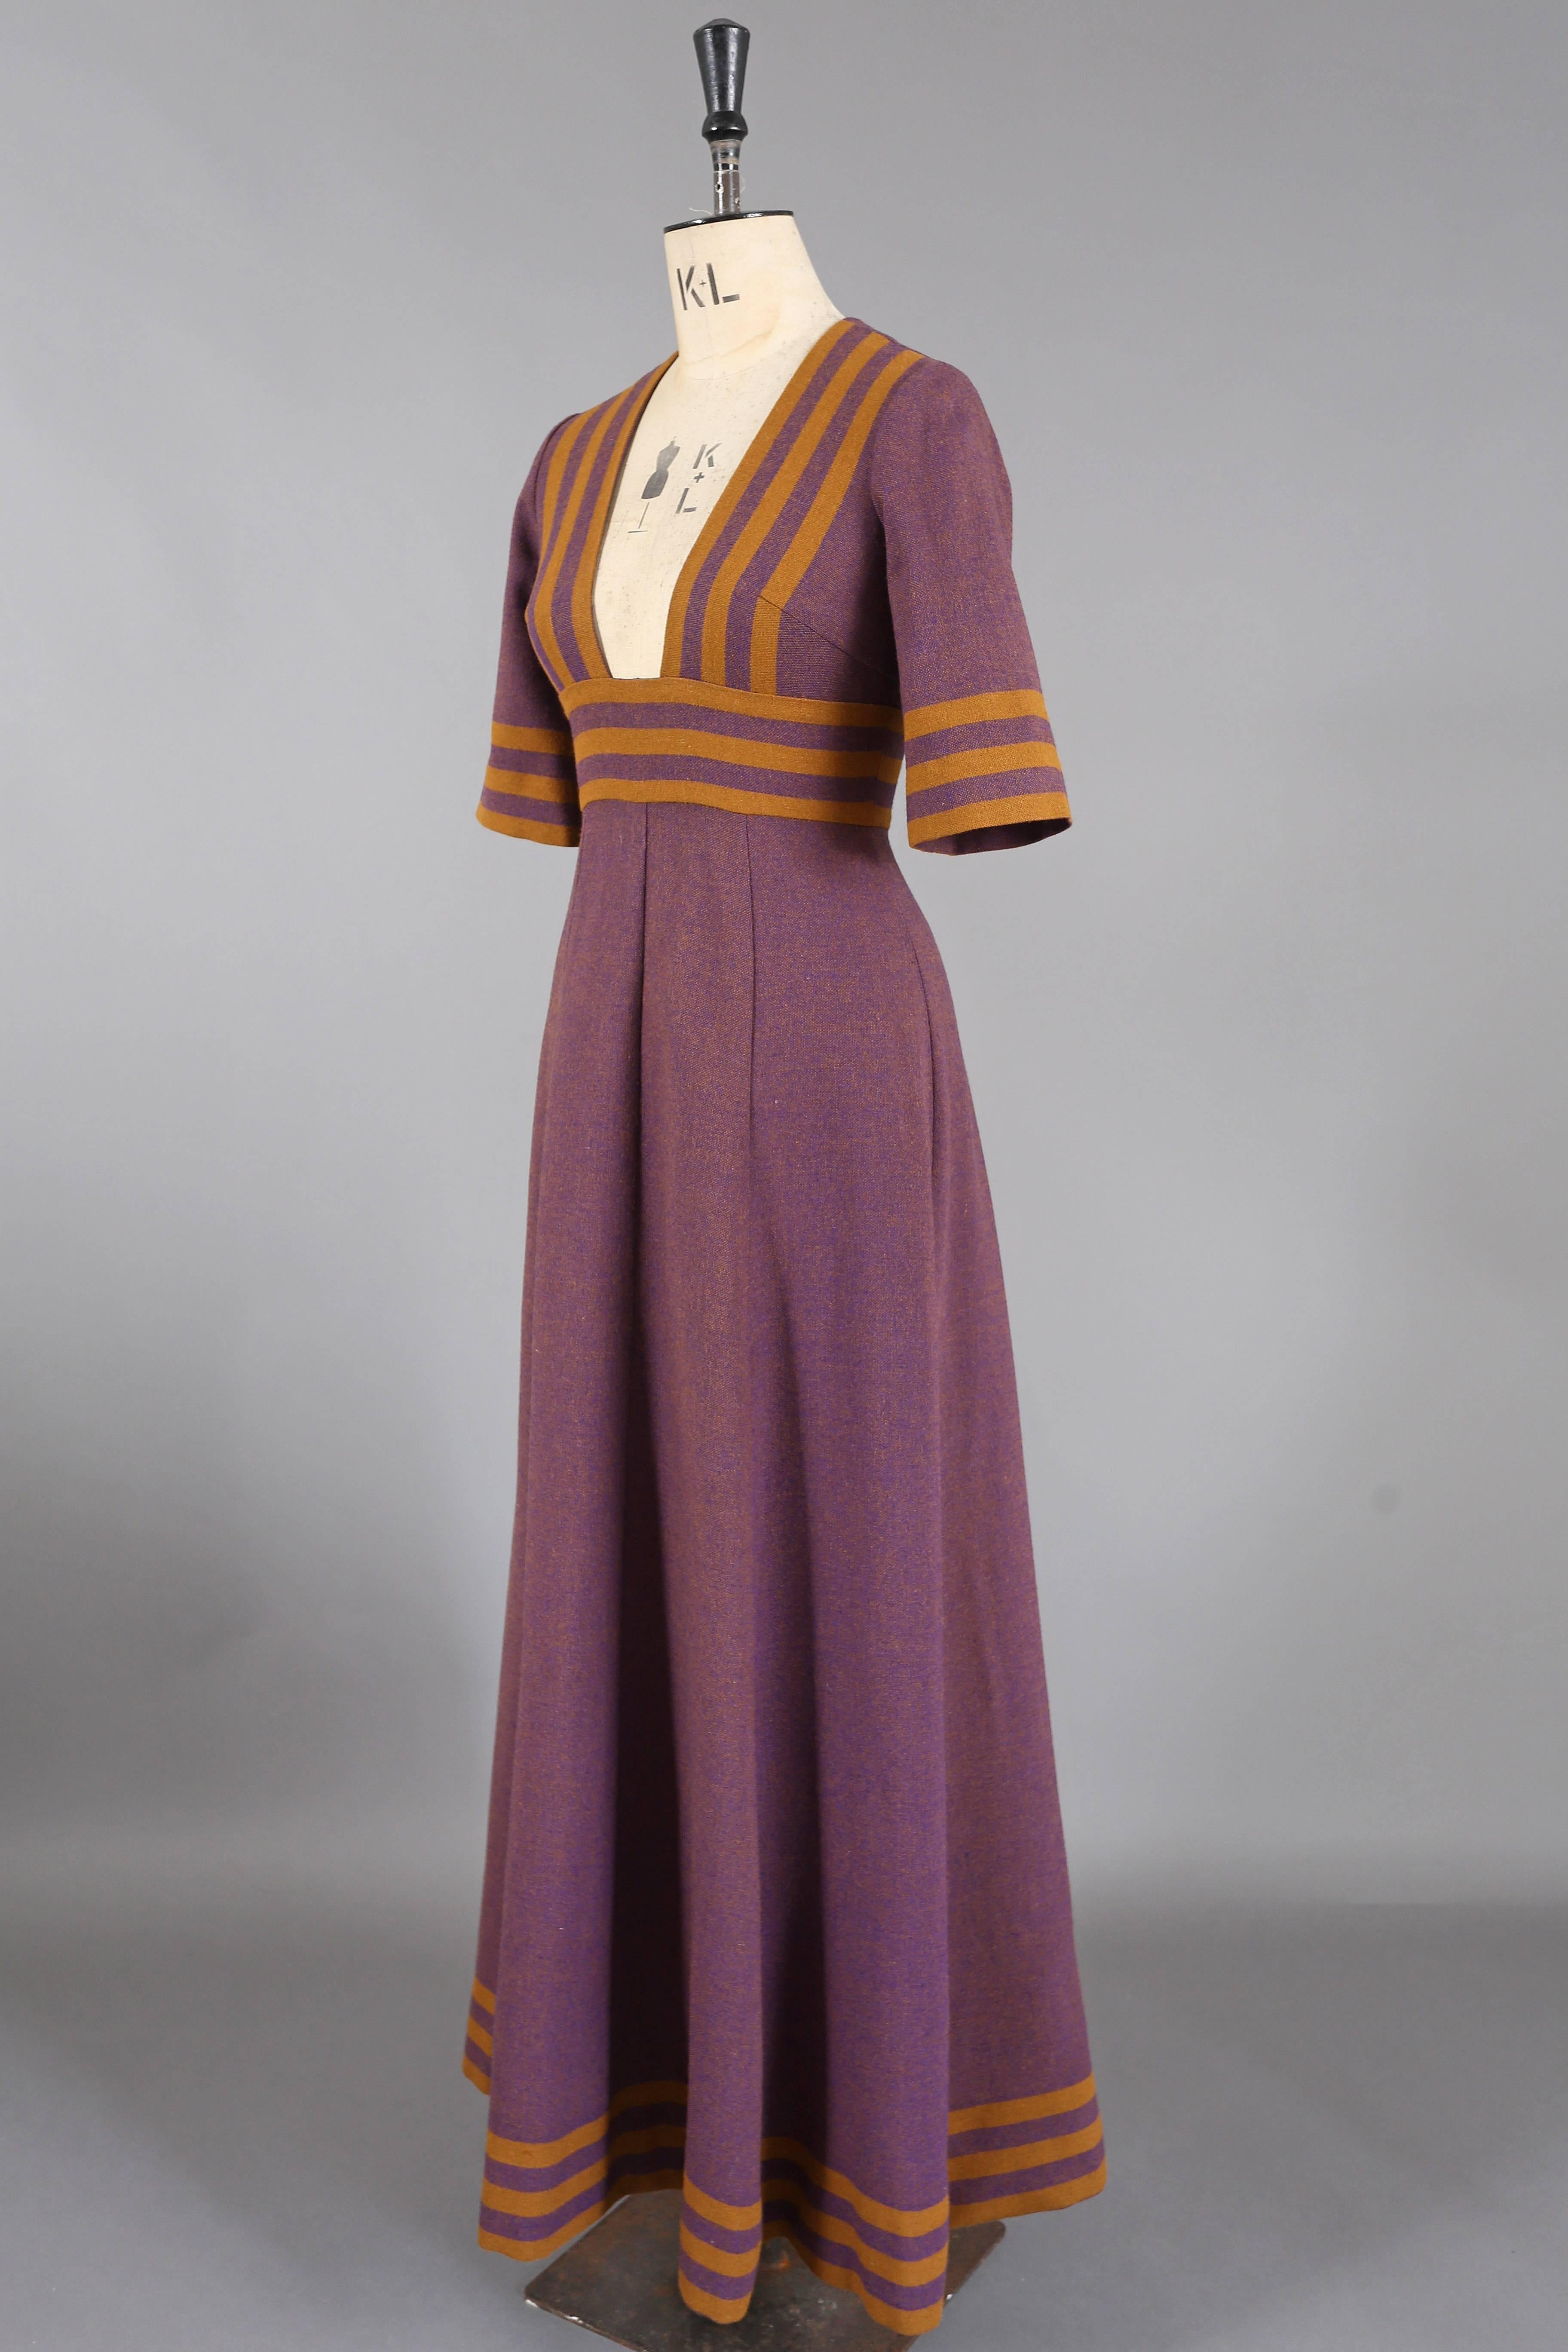 A tweed maxi dress by Jean Varon, circa 1960s. The dress features a low cut cleavage down to the waist, cropped sleeves and zip closure. 

Bust 34